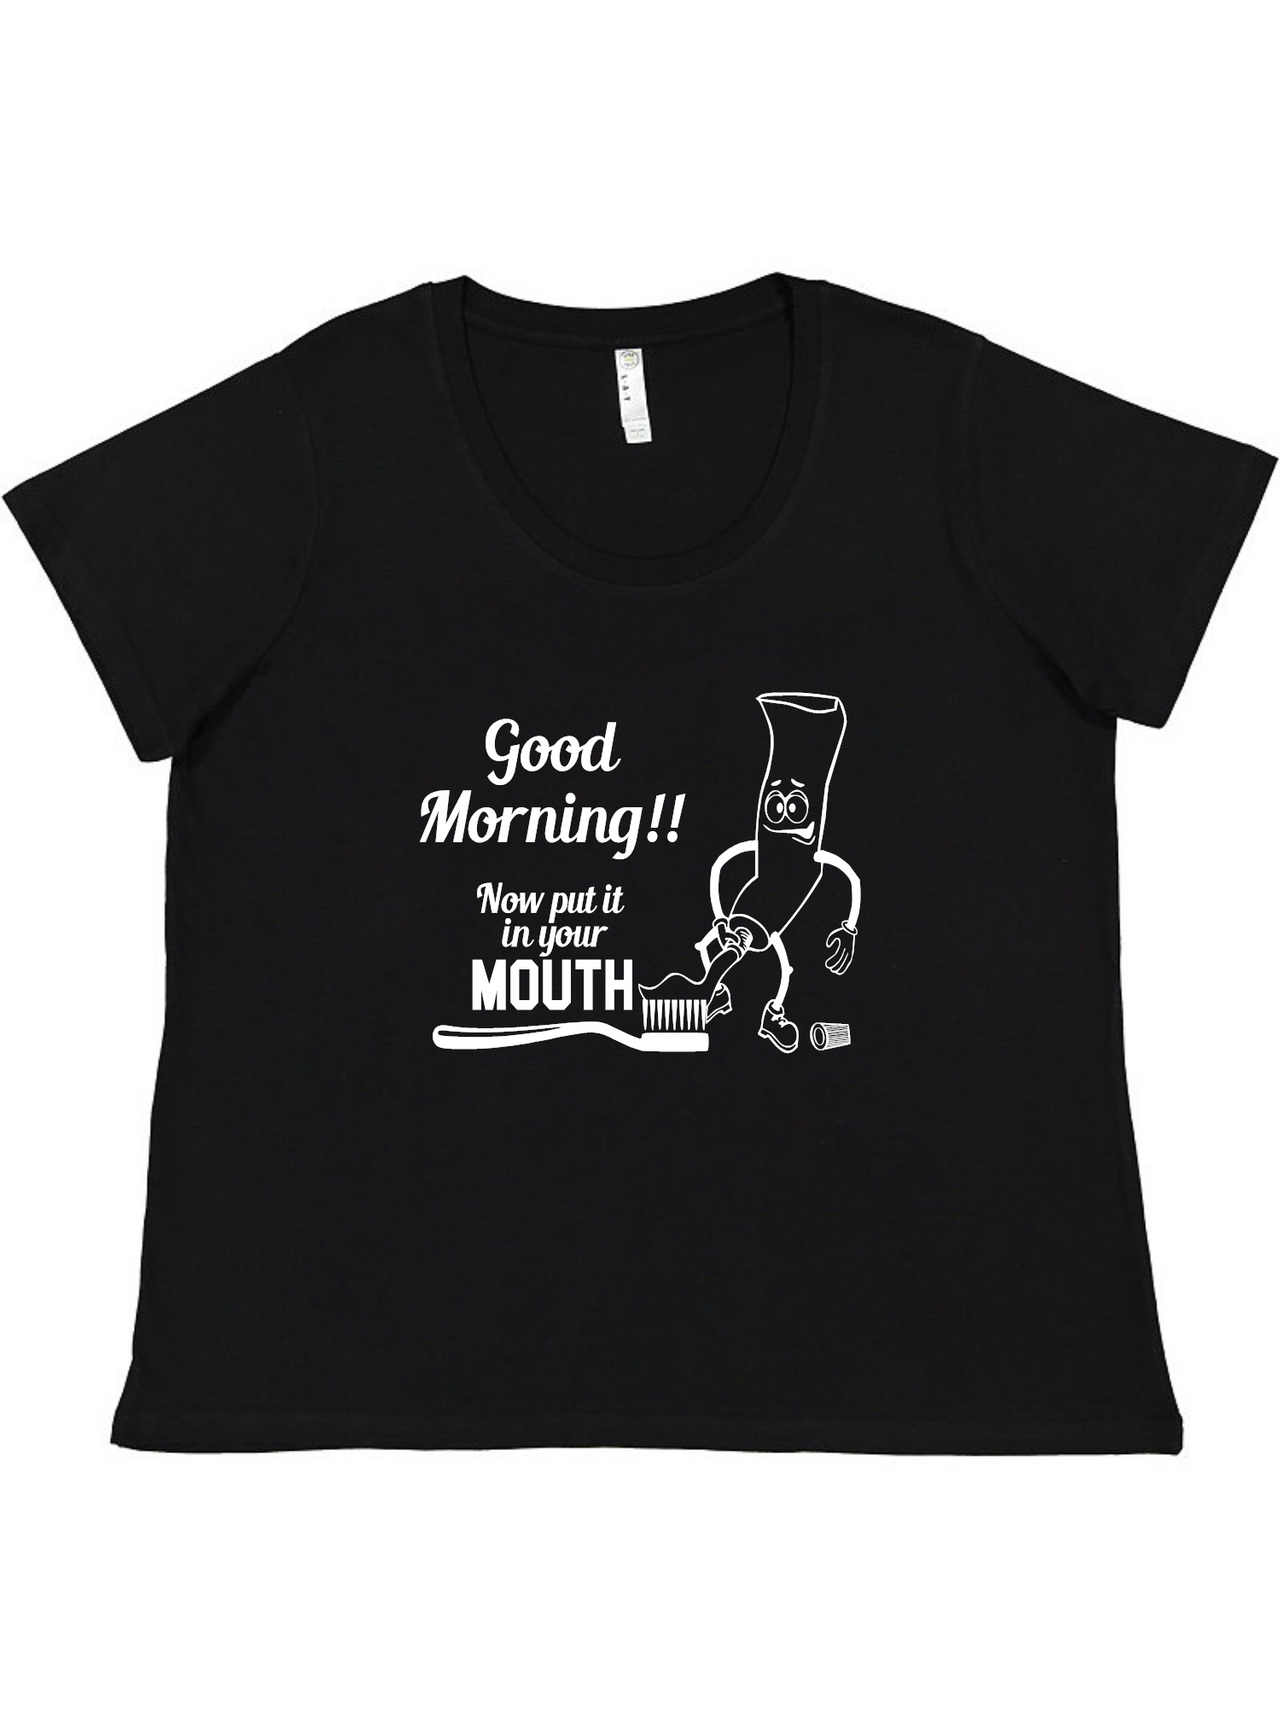 Put it in your mouth Ladies Tee Ladies Shirt by Akron Pride Custom Tees | Akron Pride Custom Tees